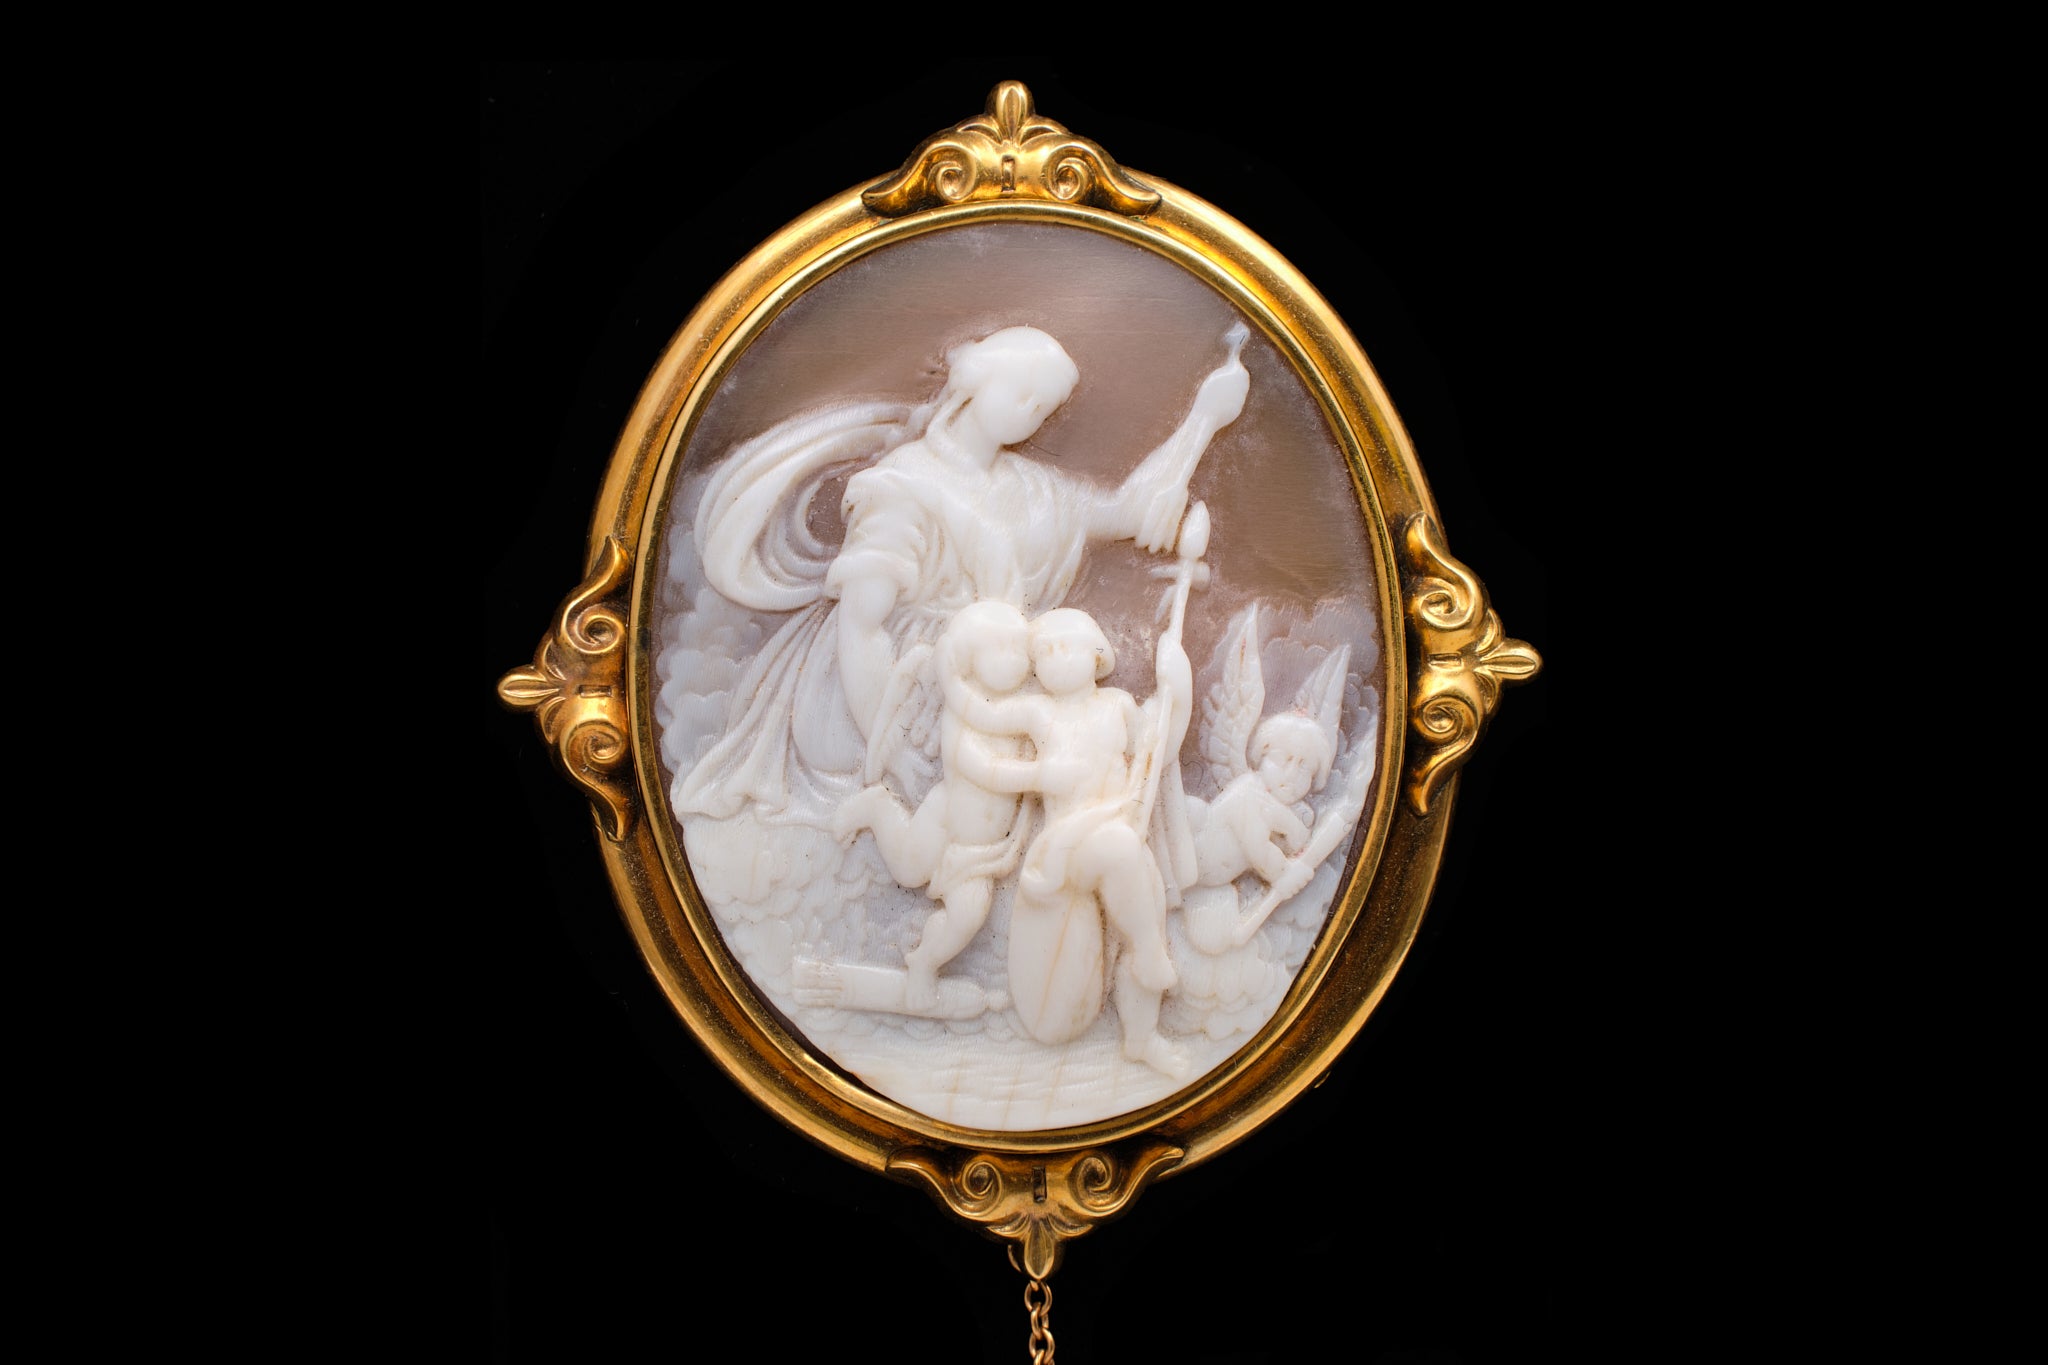 Victorian Cameo Brooch in a Gold Surround.